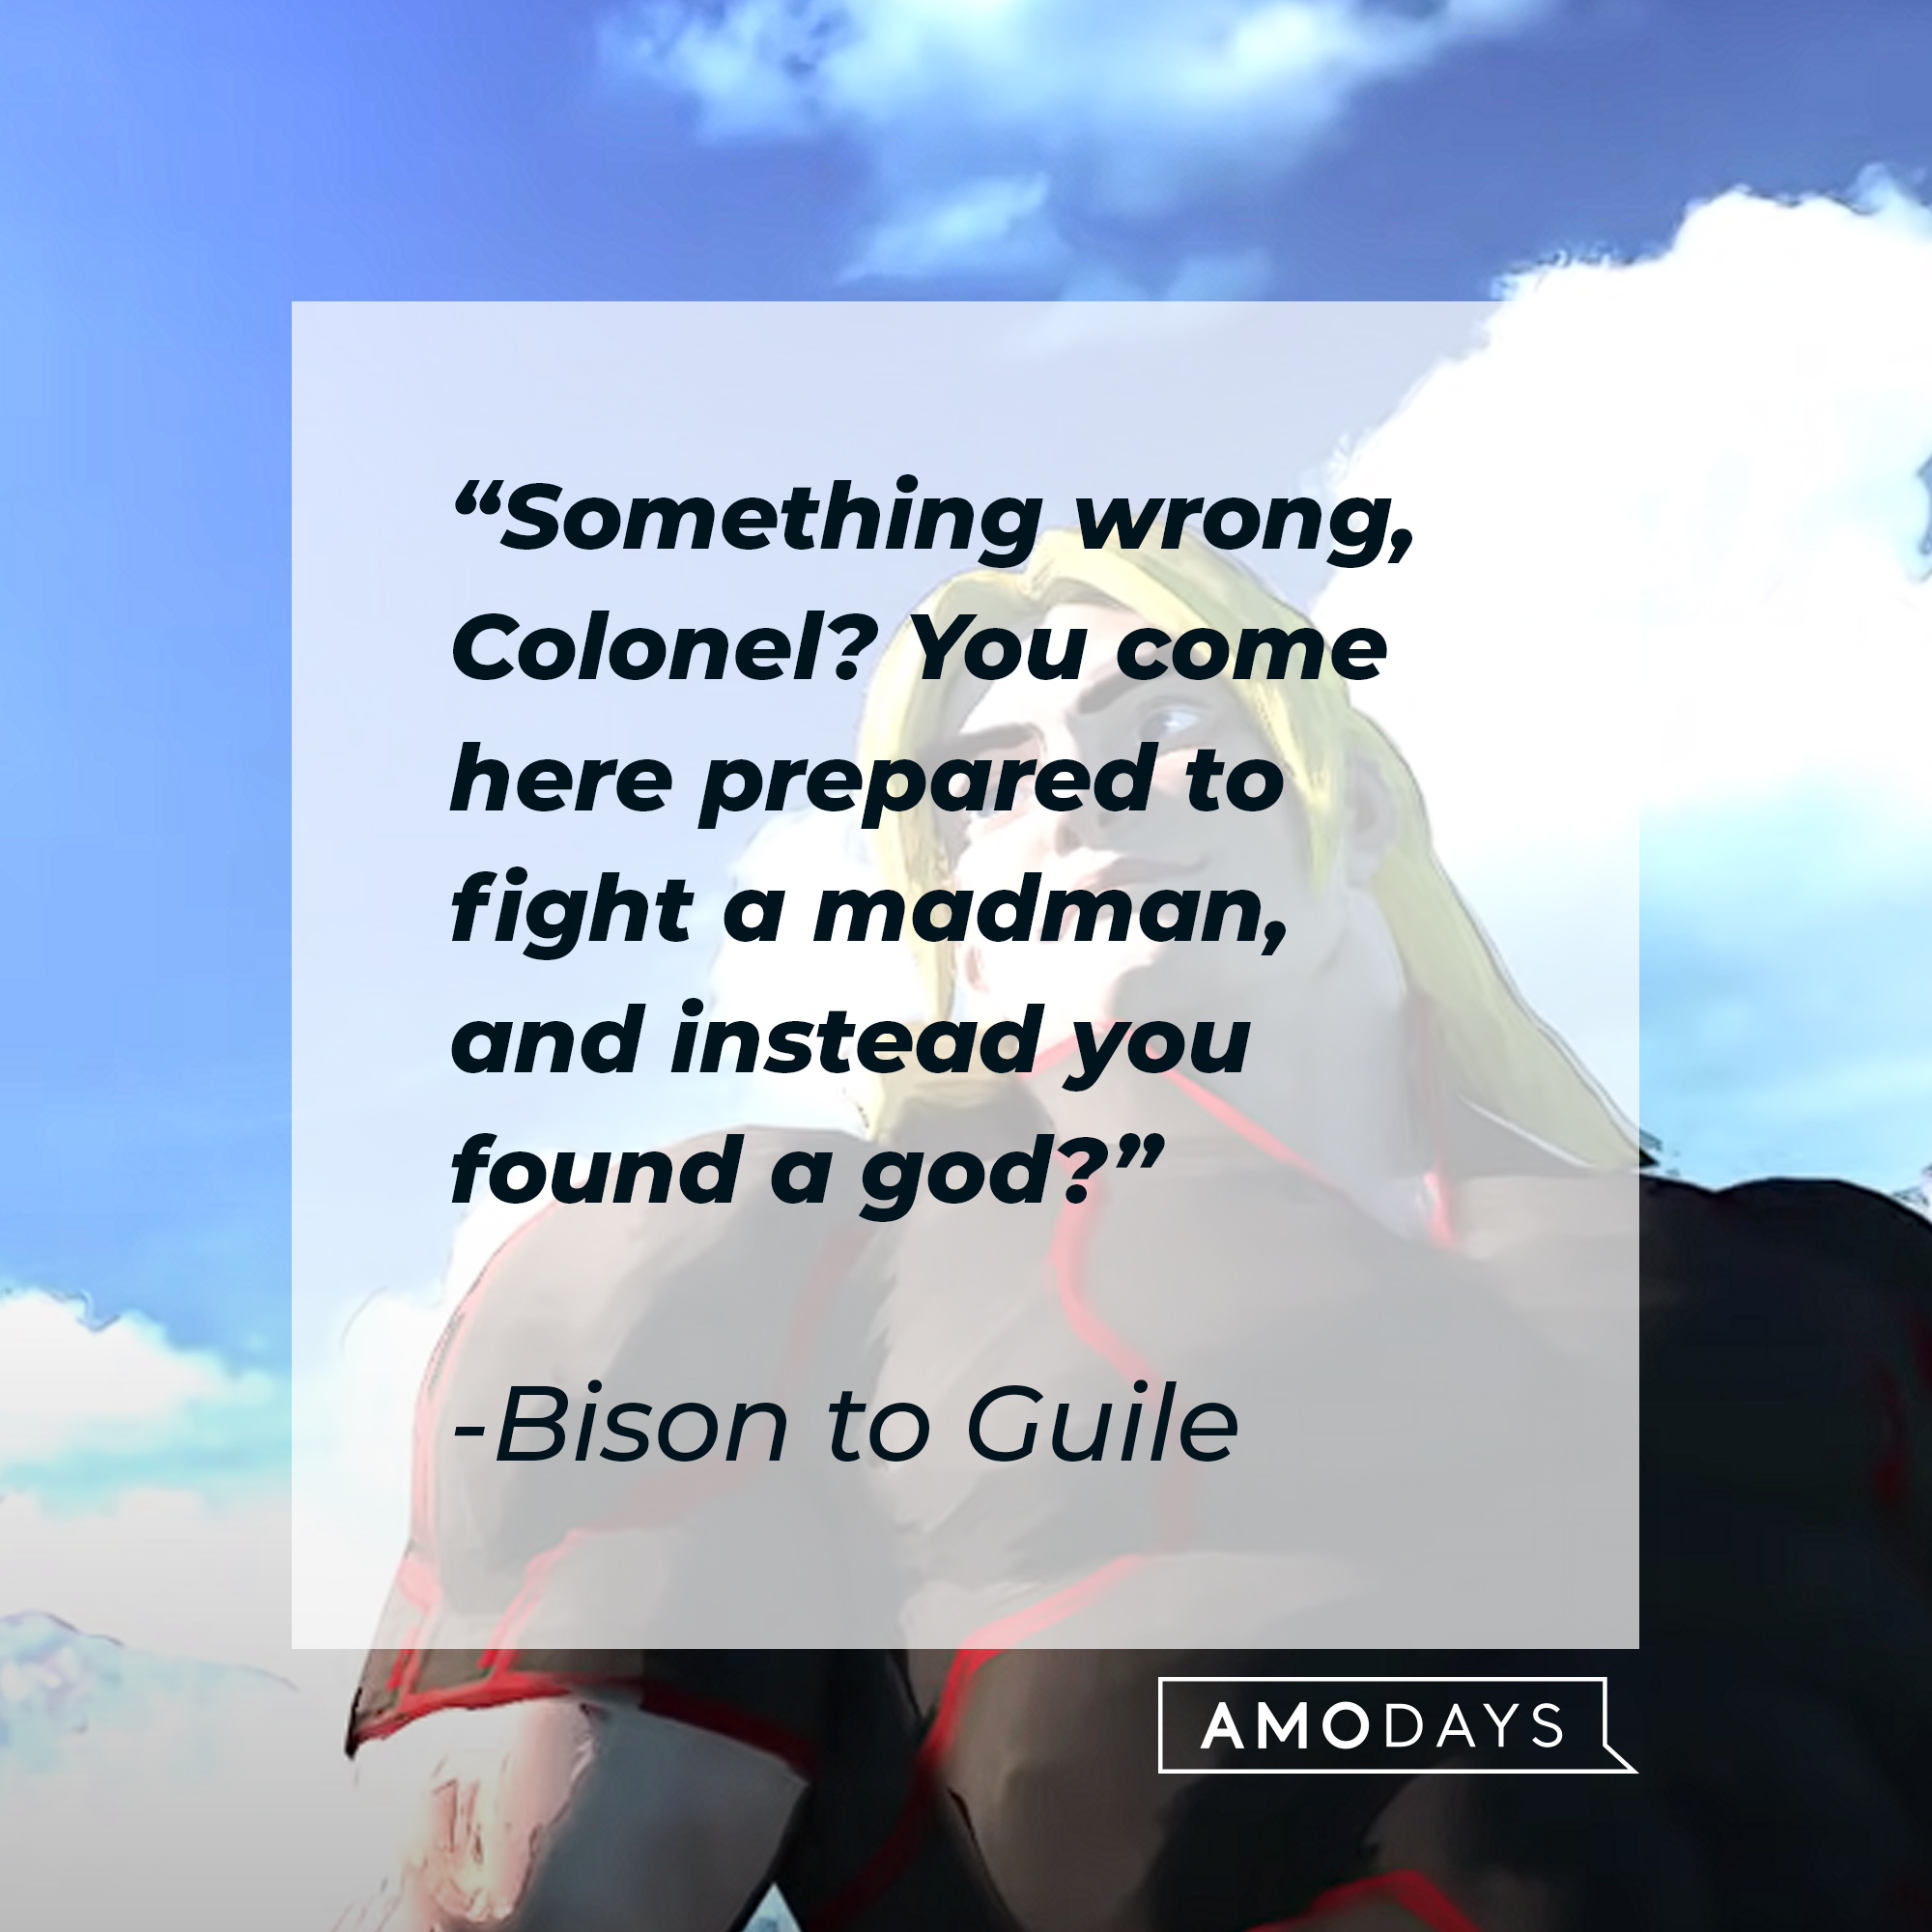 A quote from Guile to Bison: "Something wrong, Colonel? You come here prepared to fight a madman, and instead you found a god?" | Source: youtube.com/PlayStation